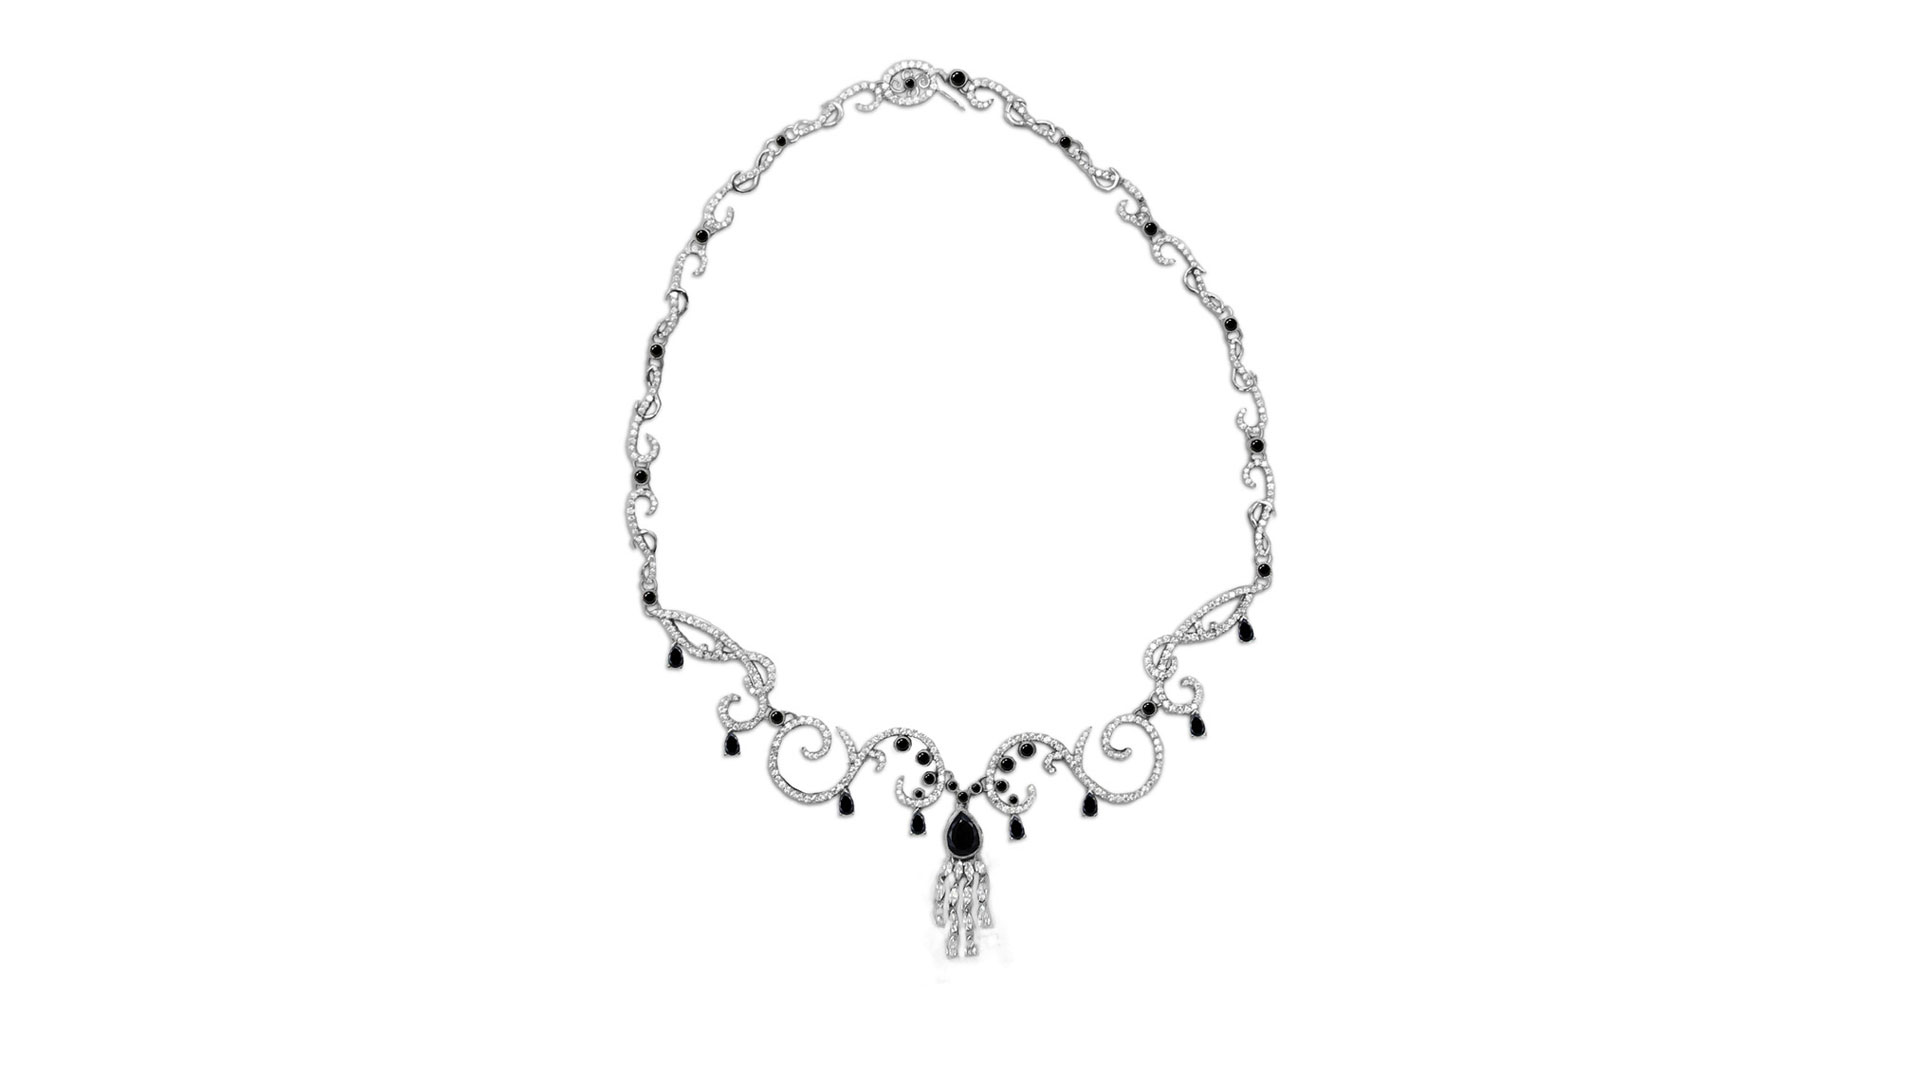 Black and white diamond necklace by Sophia Woc